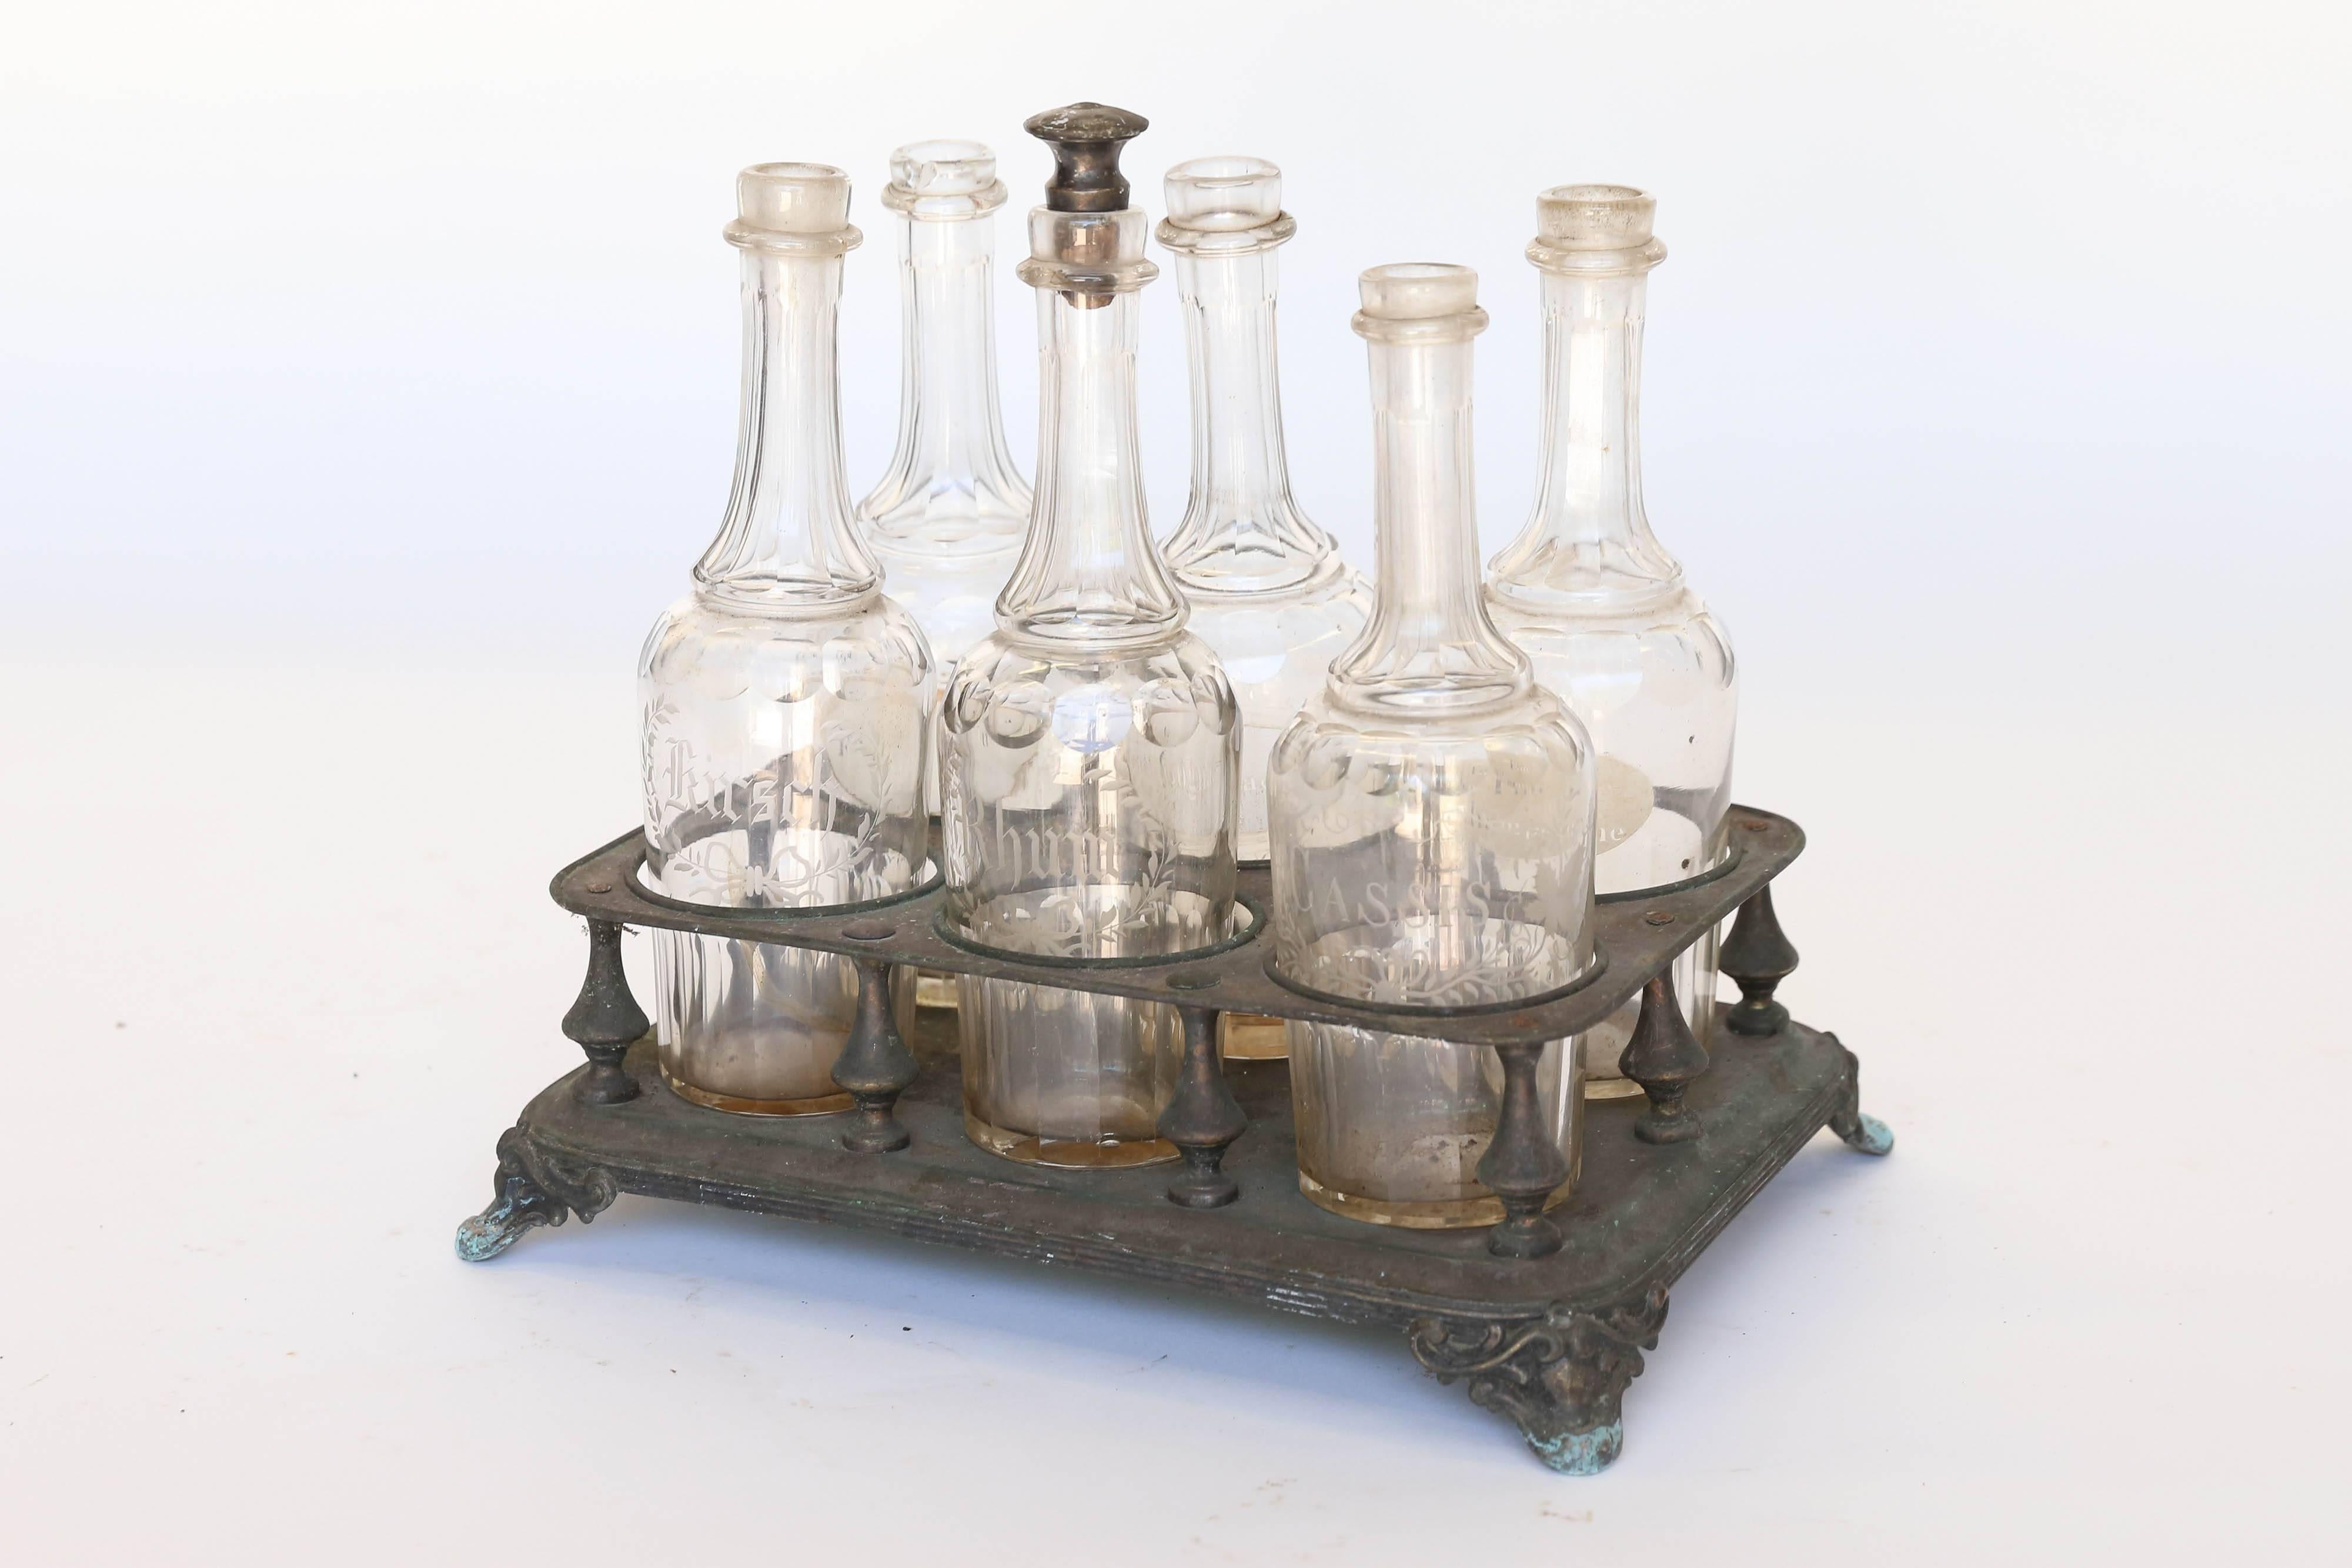 Found in France, a very old and lovely bottle holder with six etched bottles. Made of tin, the holder stands on four ornate feet and holds three liquor bottles elaborately etched 'Kirsch', 'Rhom', and 'Cassis'; the three remaining bottles are less